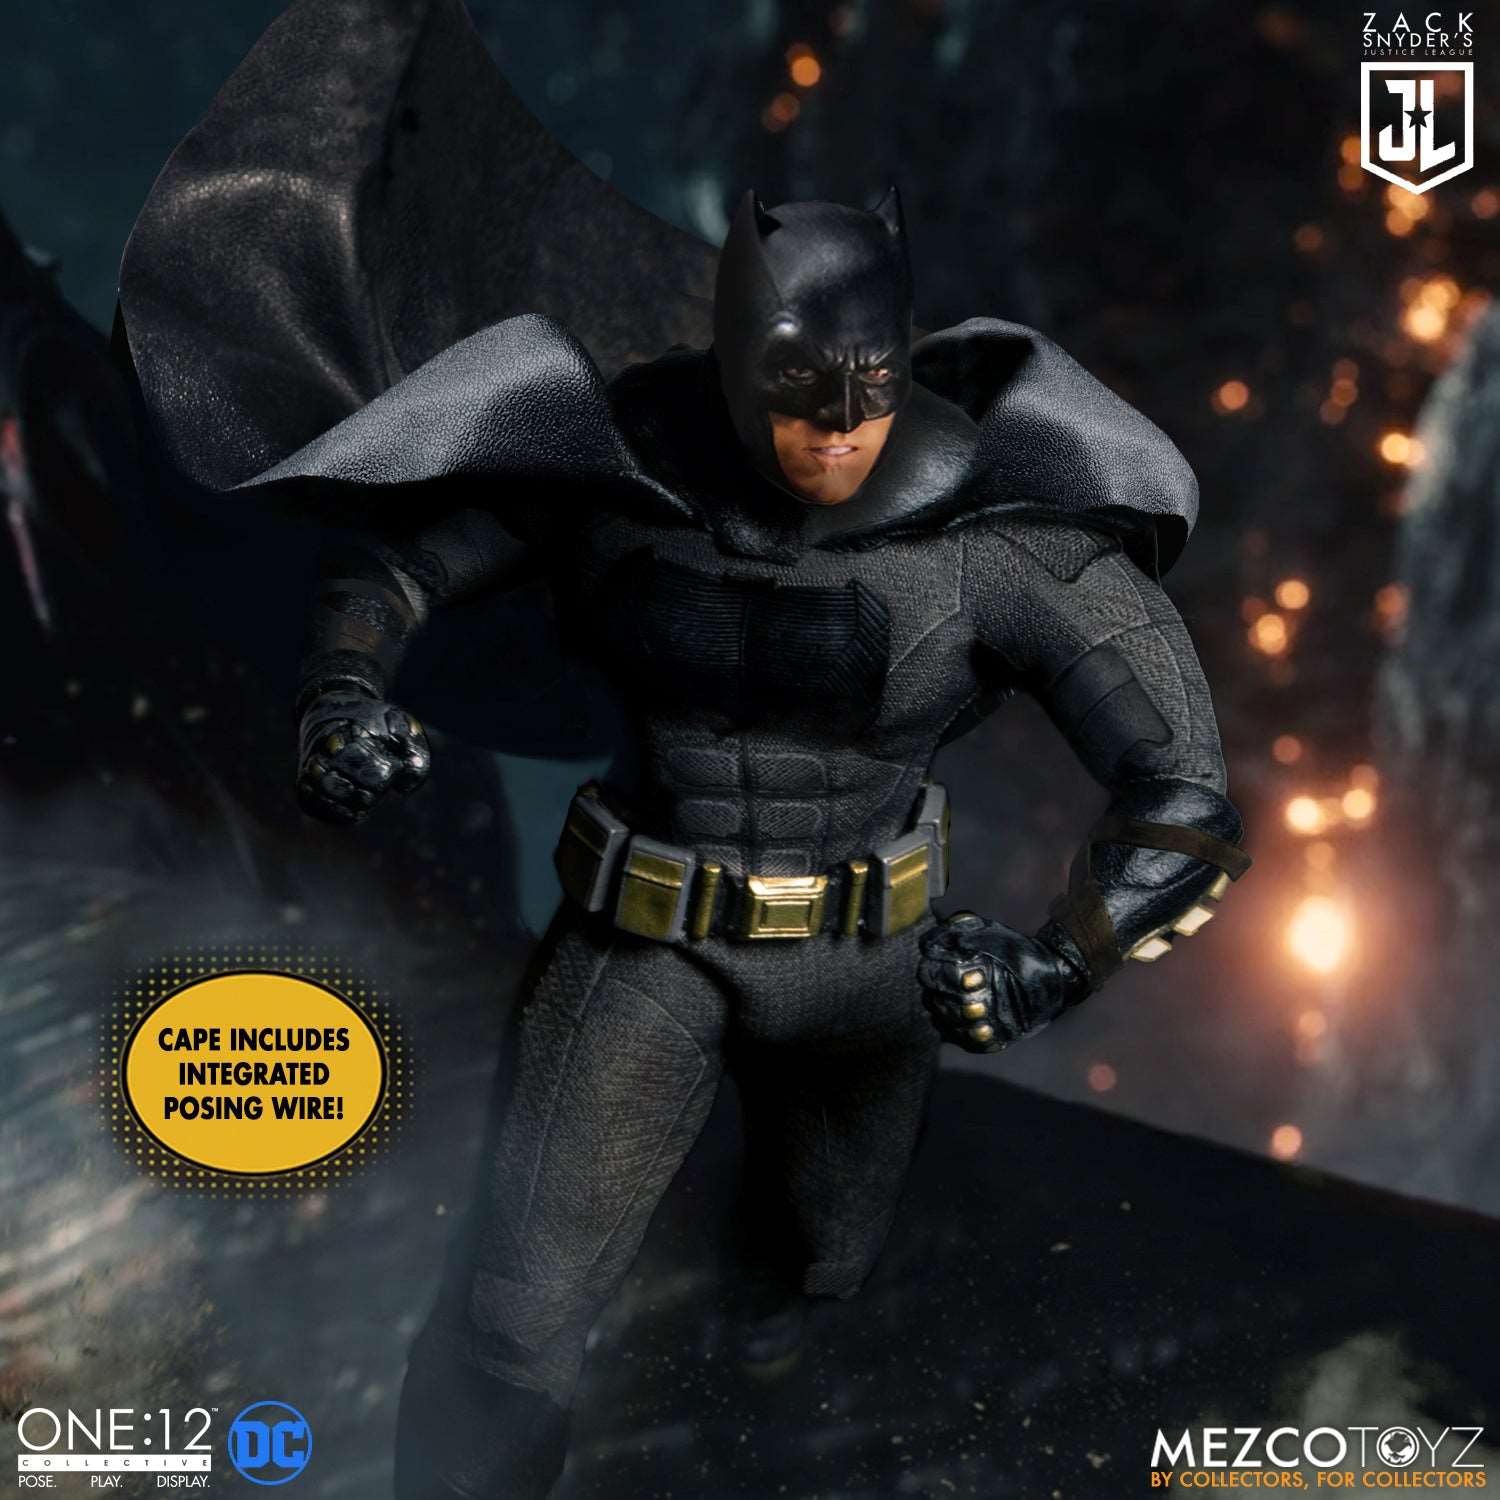 Mezco One Twelfth Collective Zack Snyder’s Justice League Deluxe Steel Boxed Set Batman figure with cape and integrated posing wire